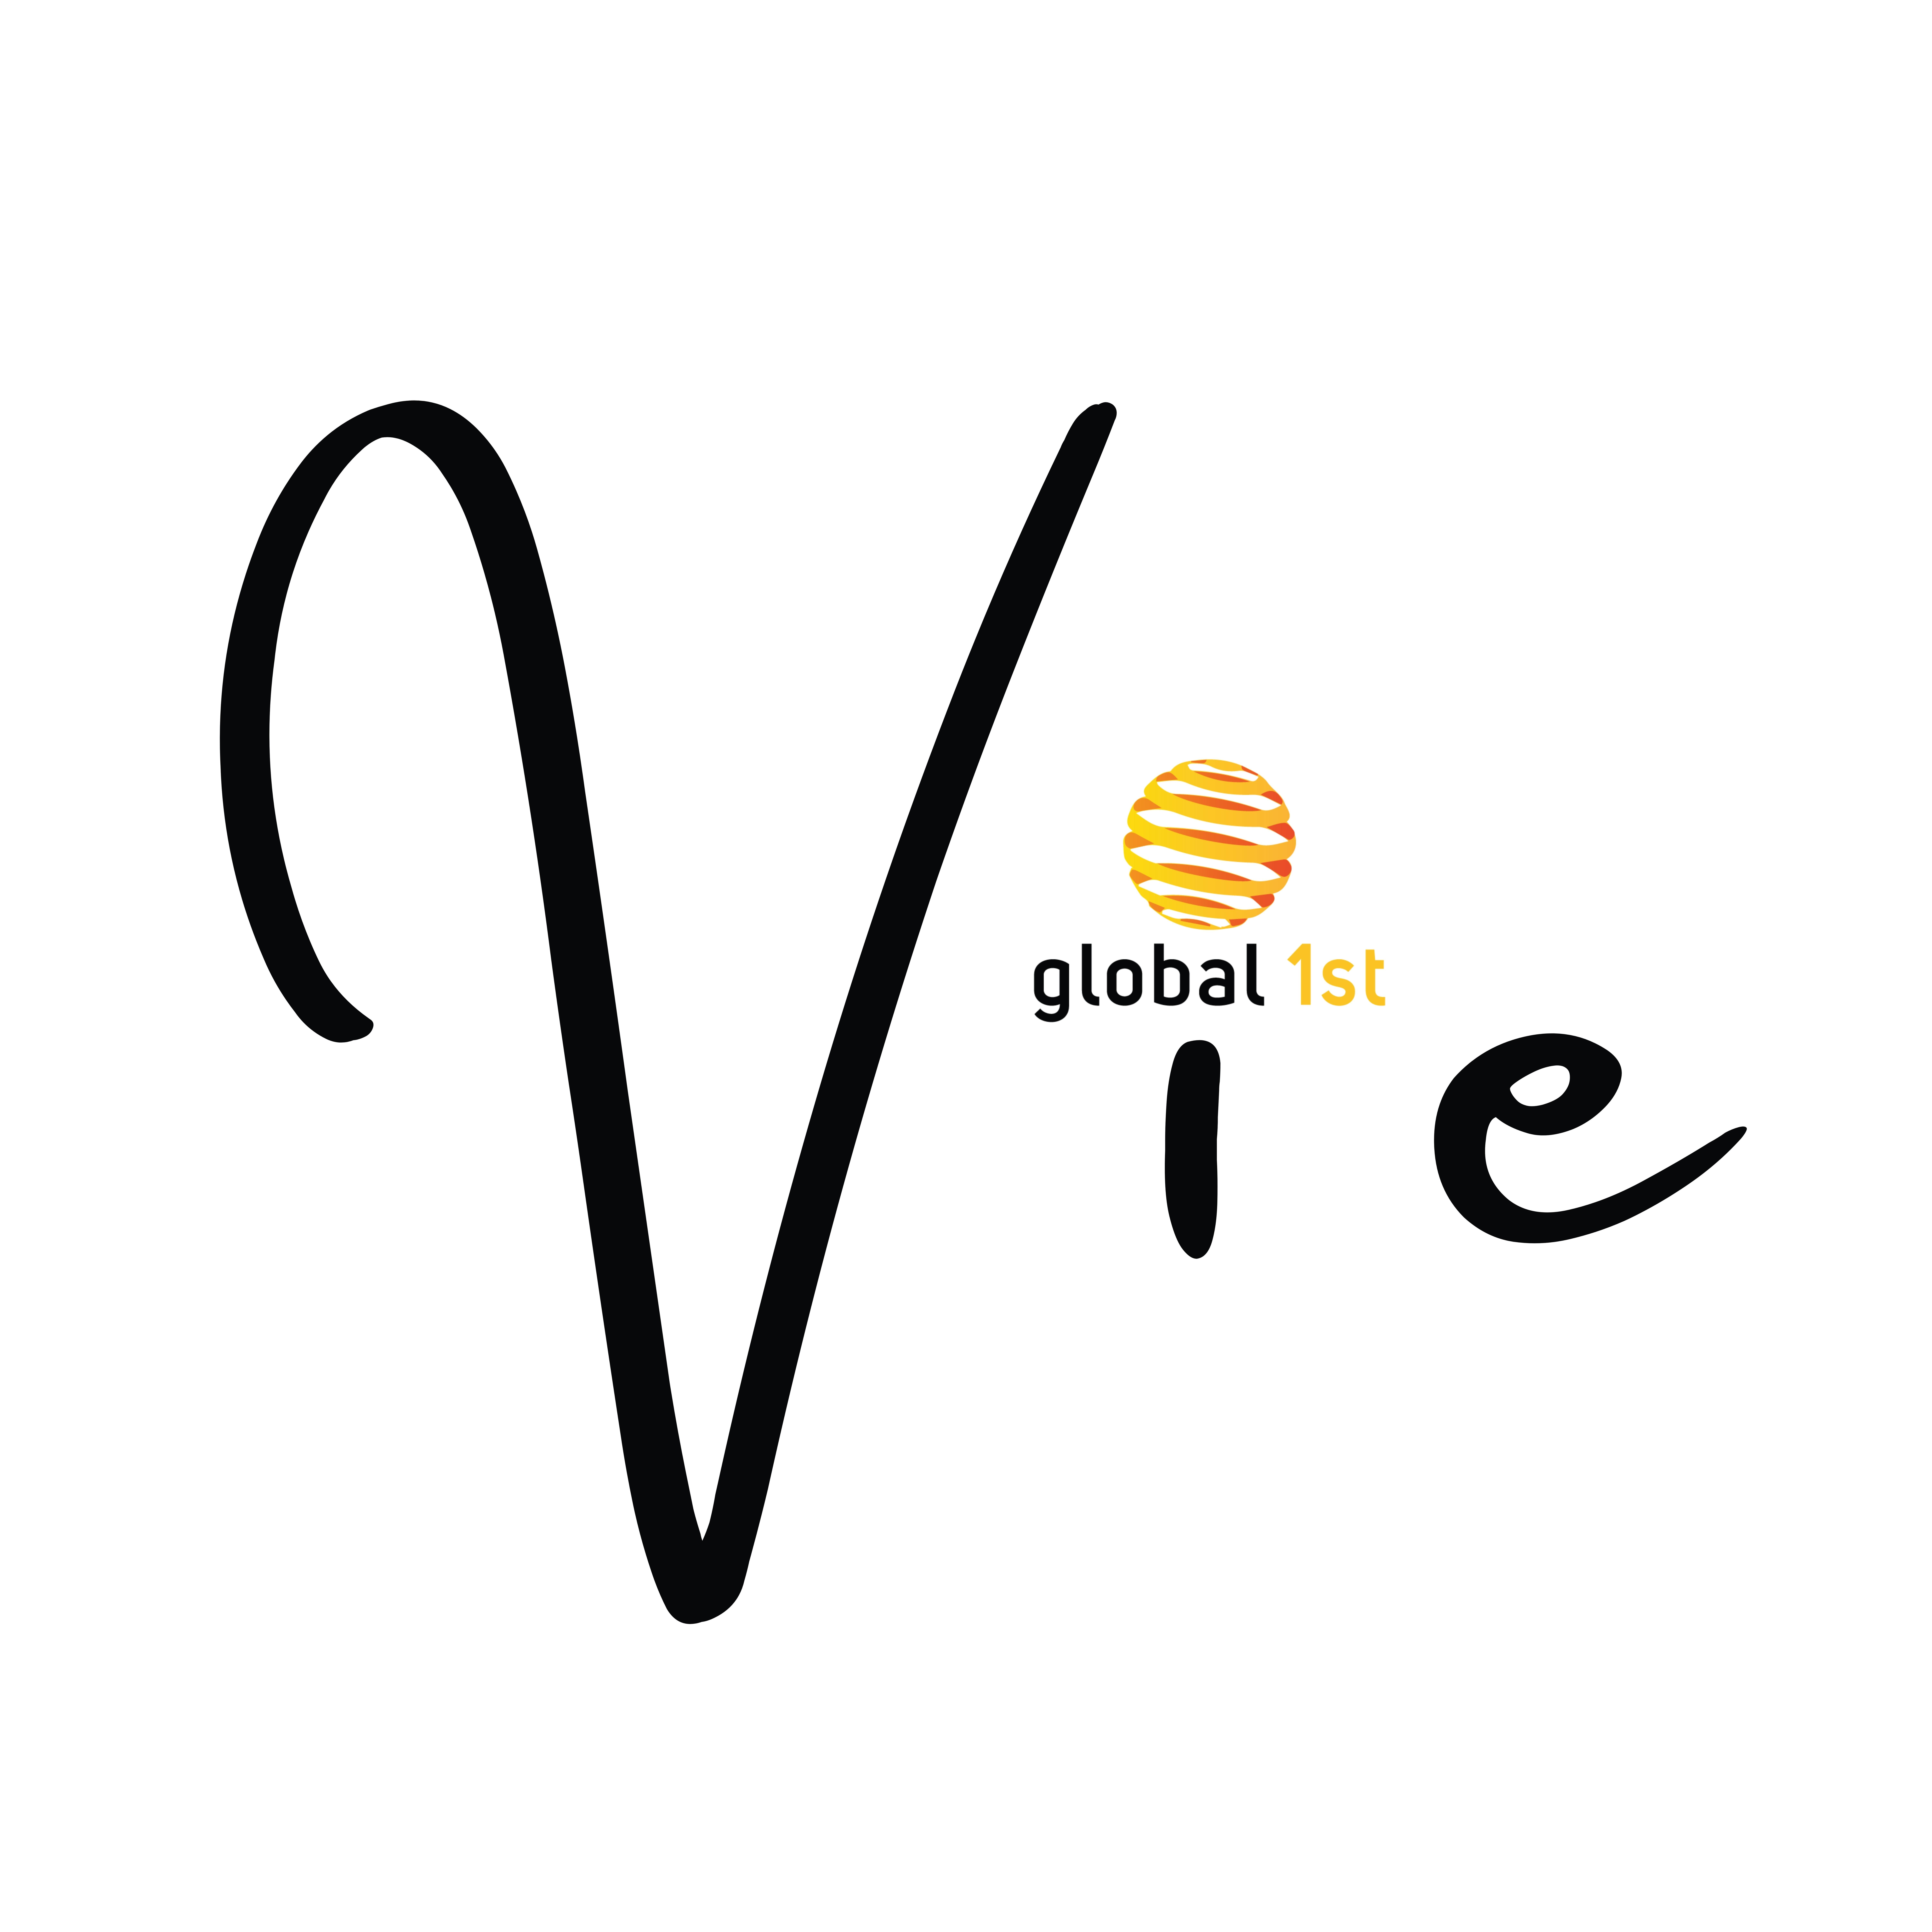 Global 1st VIE  - bringing the hidden gems of the world one step closer